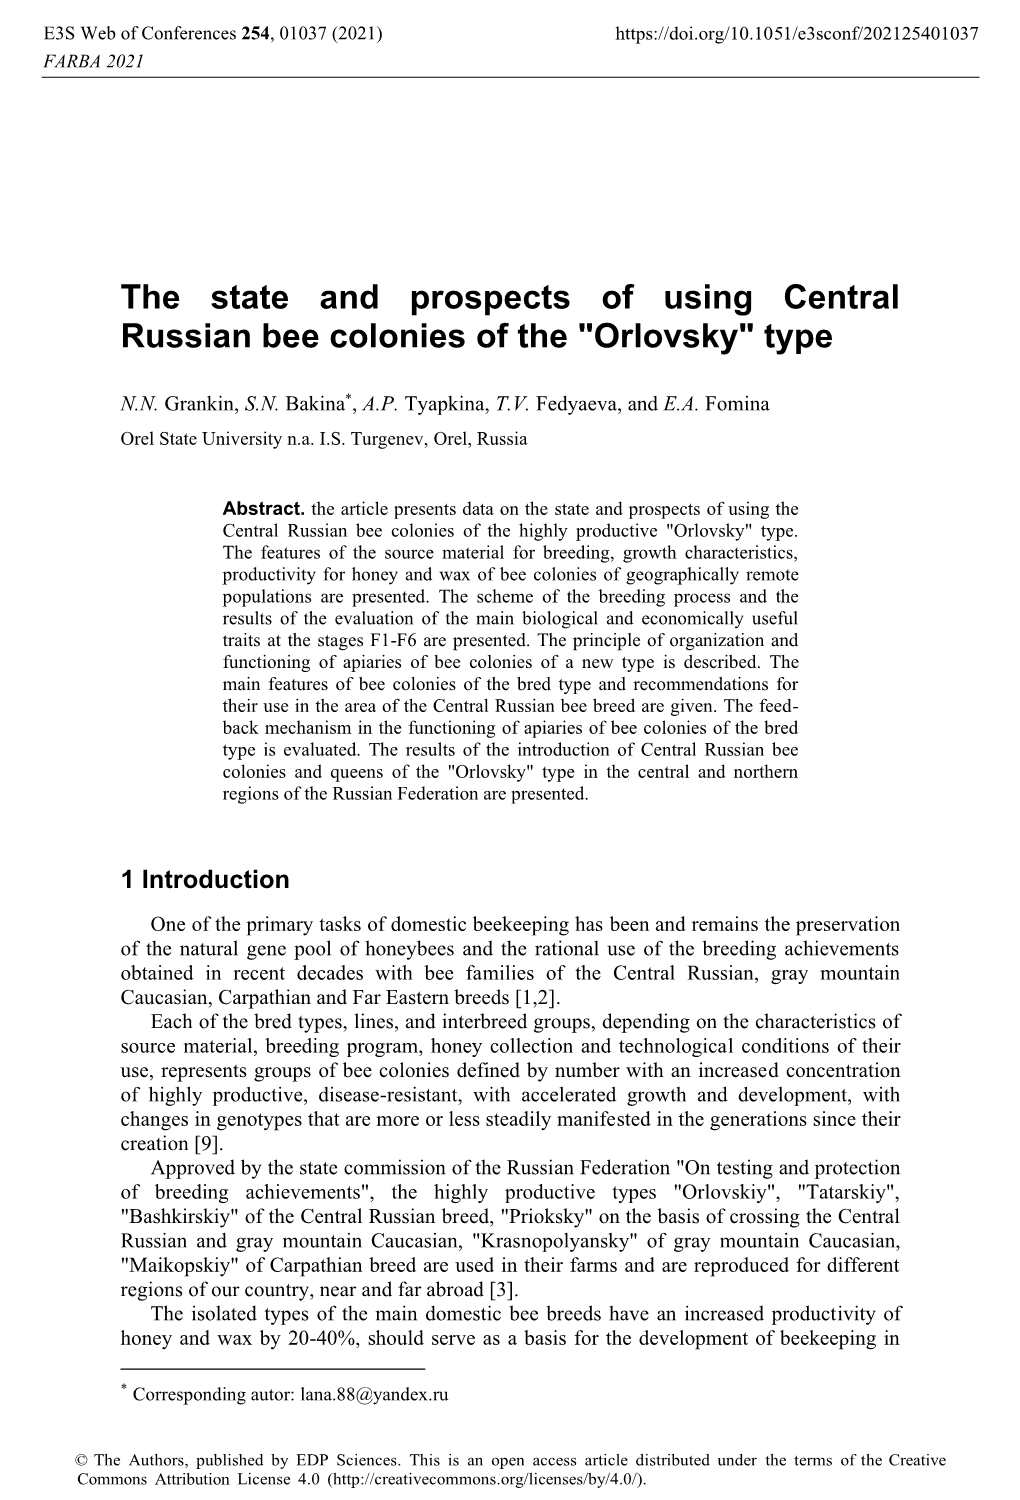 The State and Prospects of Using Central Russian Bee Colonies of the "Orlovsky" Type